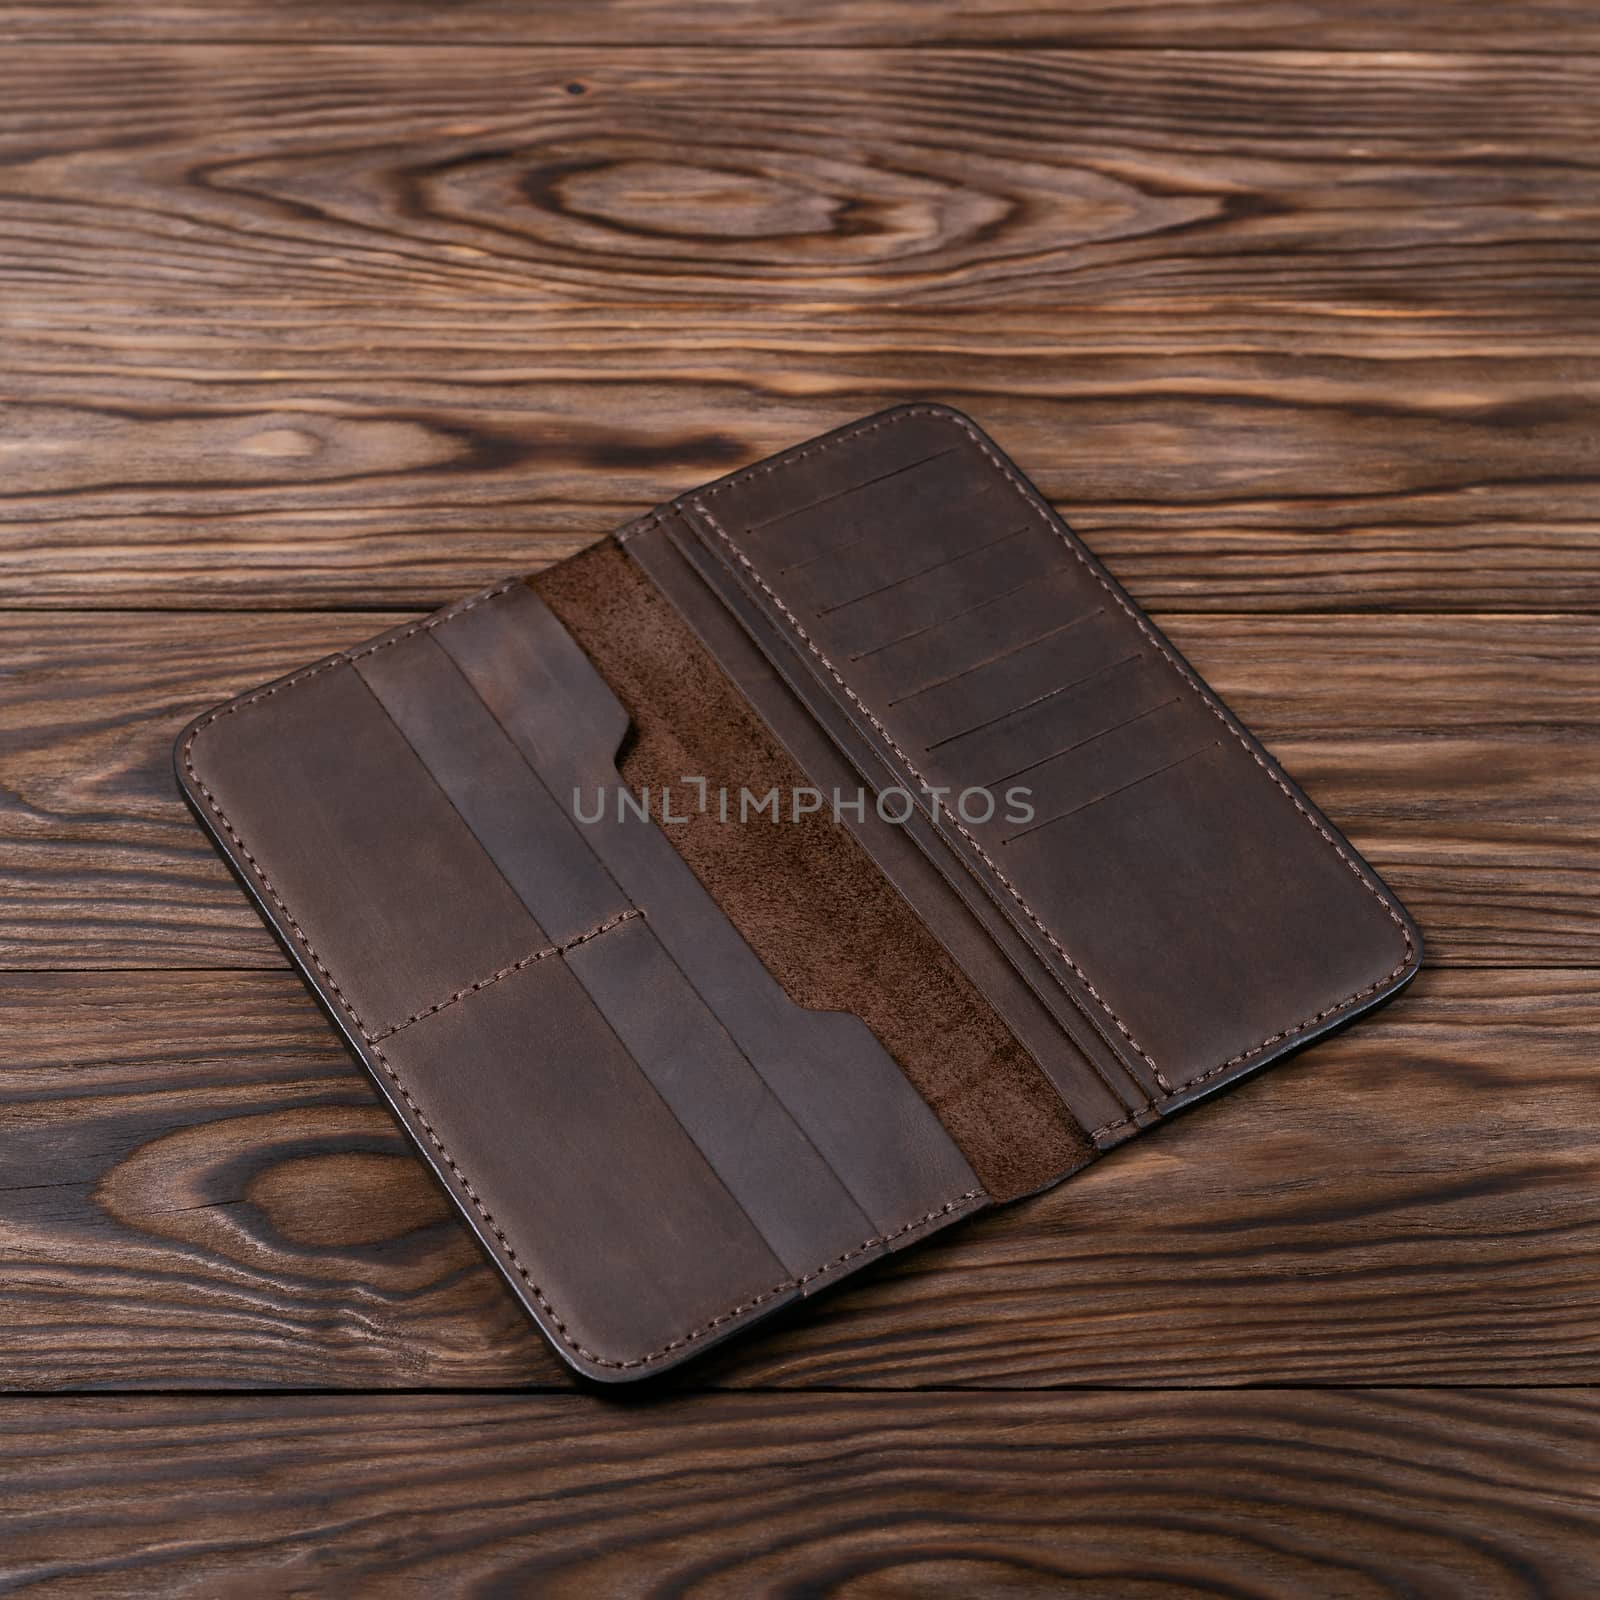 Brown color handmade leather porte-monnaie on wooden textured background. Purse is opened and empty. Side view. Stock photo of luxury accessories. by alexsdriver